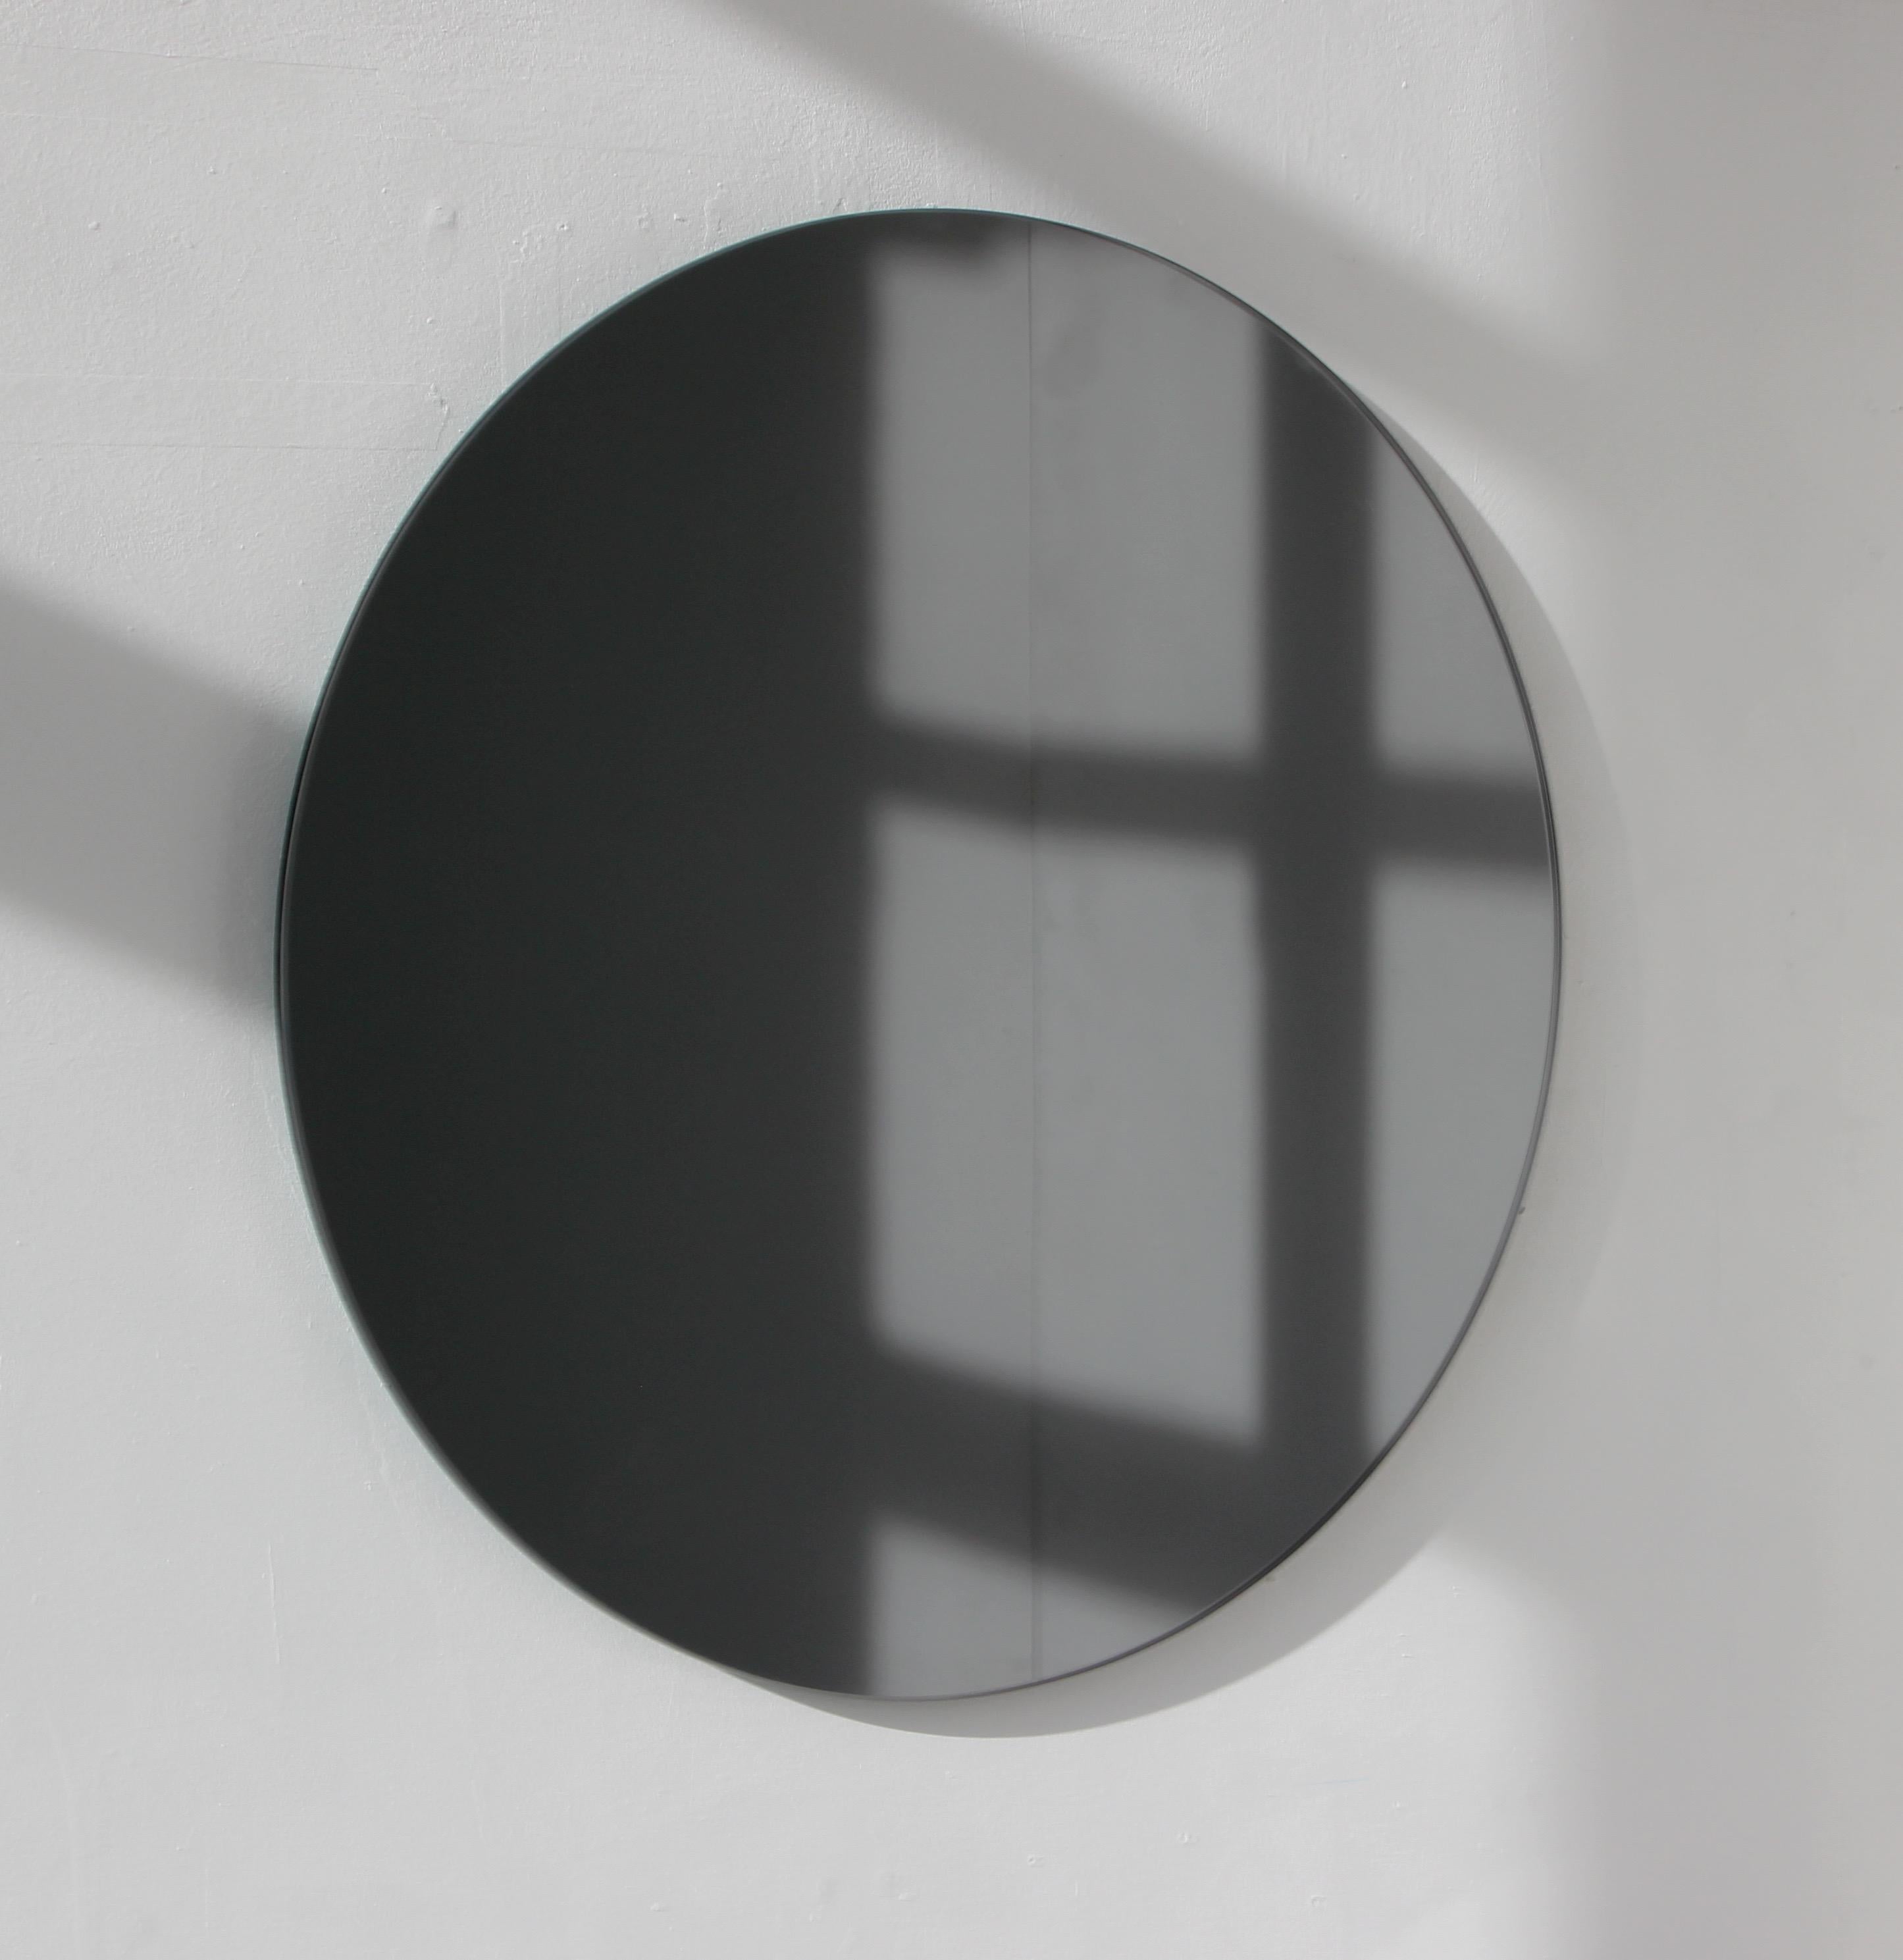 Charming and minimalist round frameless black tinted mirror with a floating effect. Quality design that ensures the mirror sits perfectly parallel to the wall. Designed and made in London, UK.

Fitted with professional plates not visible once